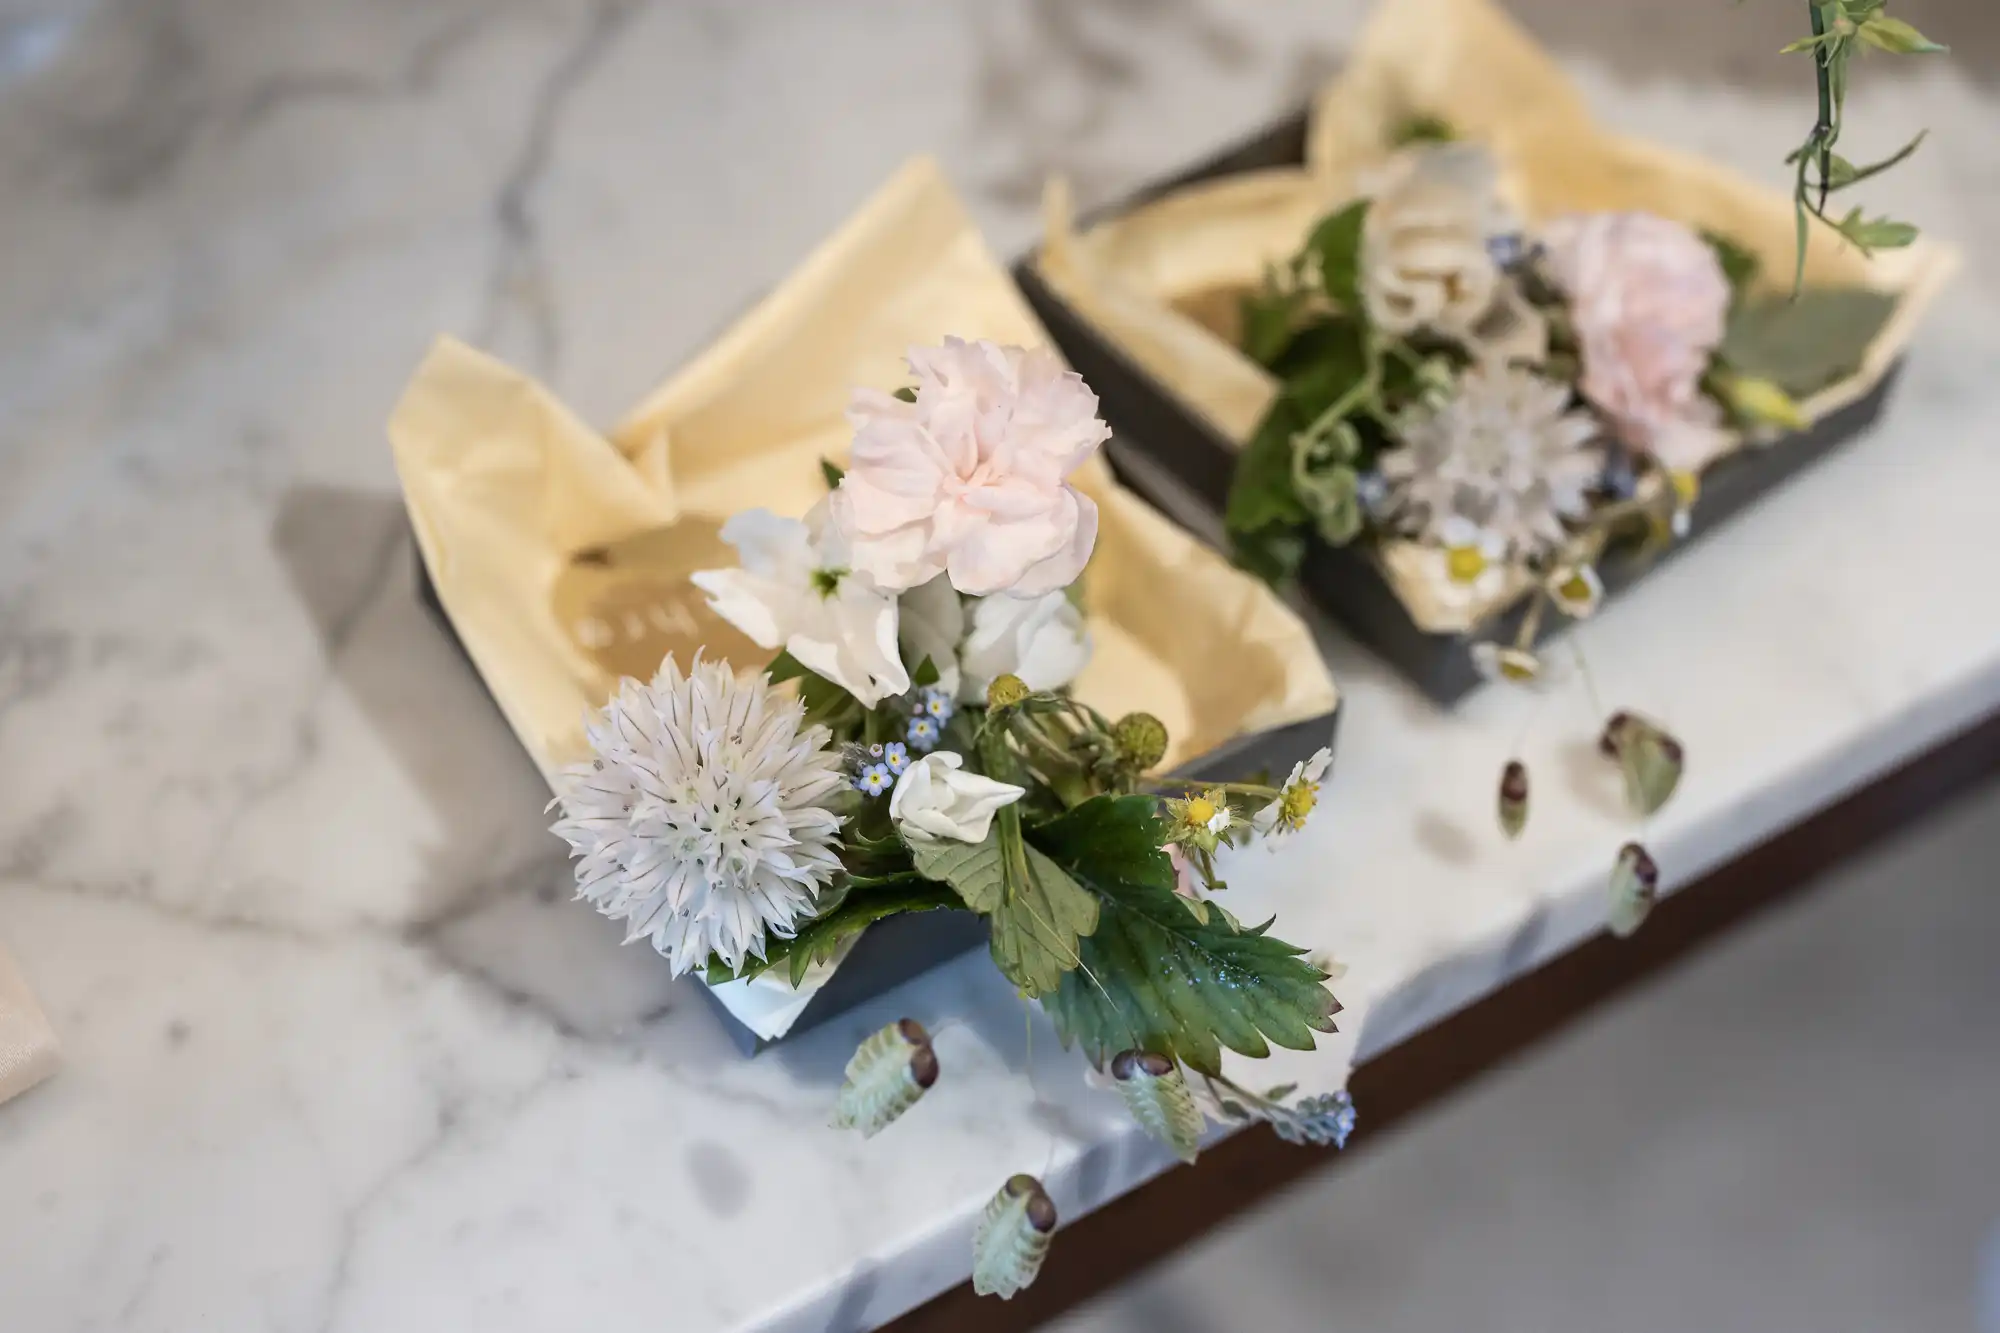 Three floral arrangements in black square containers wrapped with beige paper, displayed on a marble countertop.